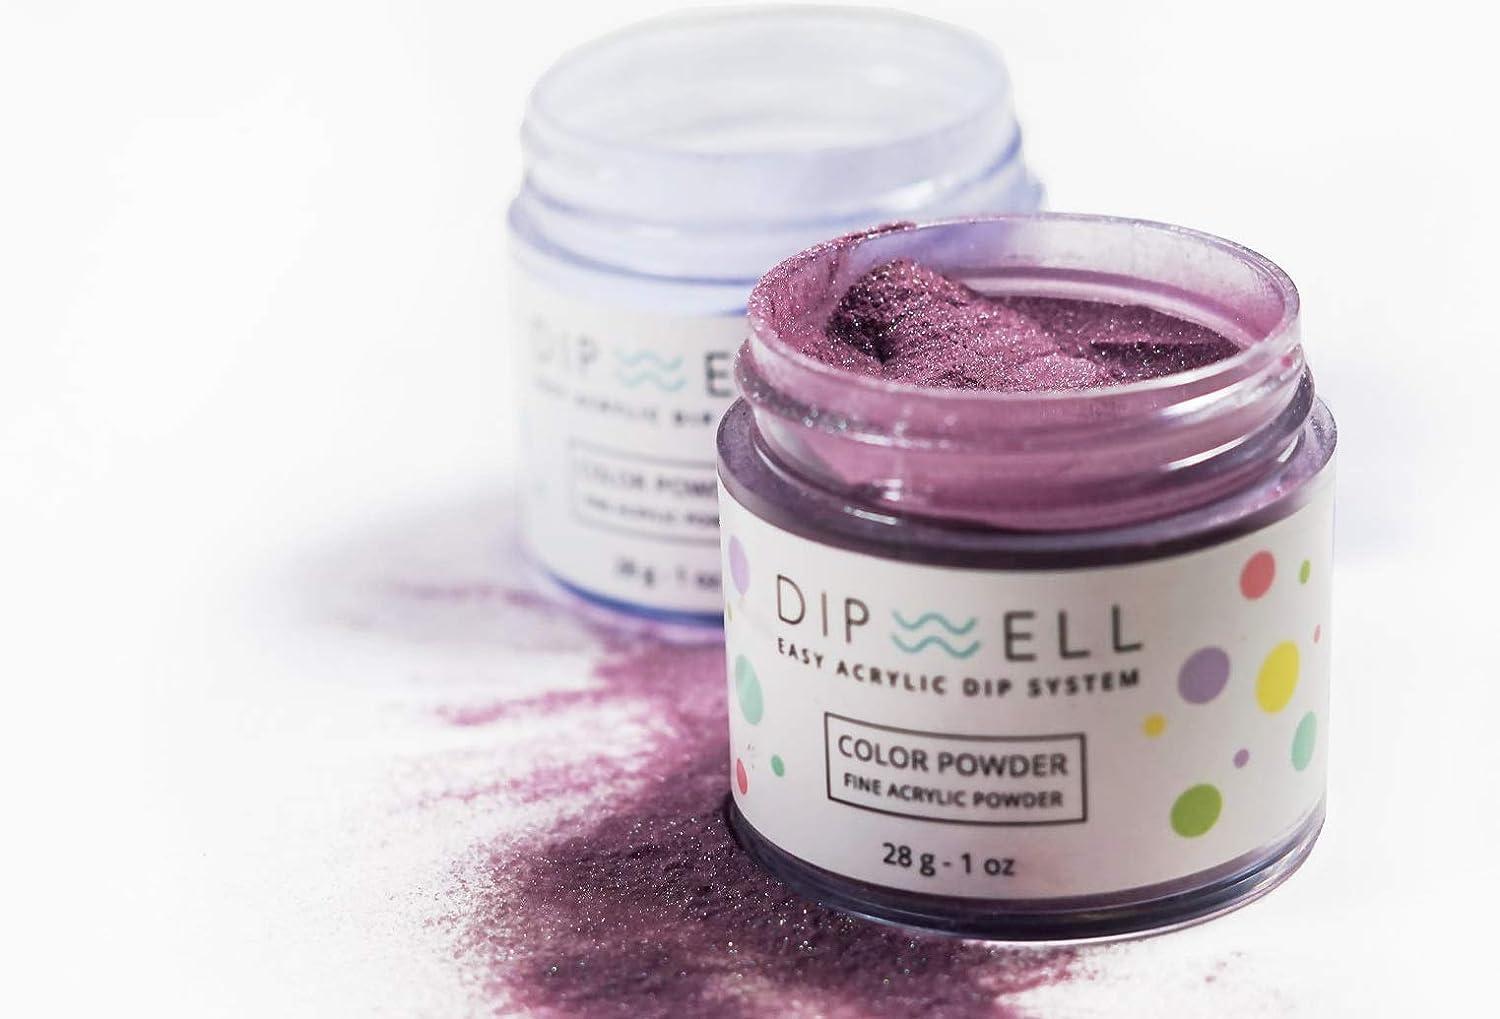 Nail Dip Powder, Glitter Color Collection, Dipping Acrylic for Any Kit or System by DipWell (GL - 25), Size: 1 oz